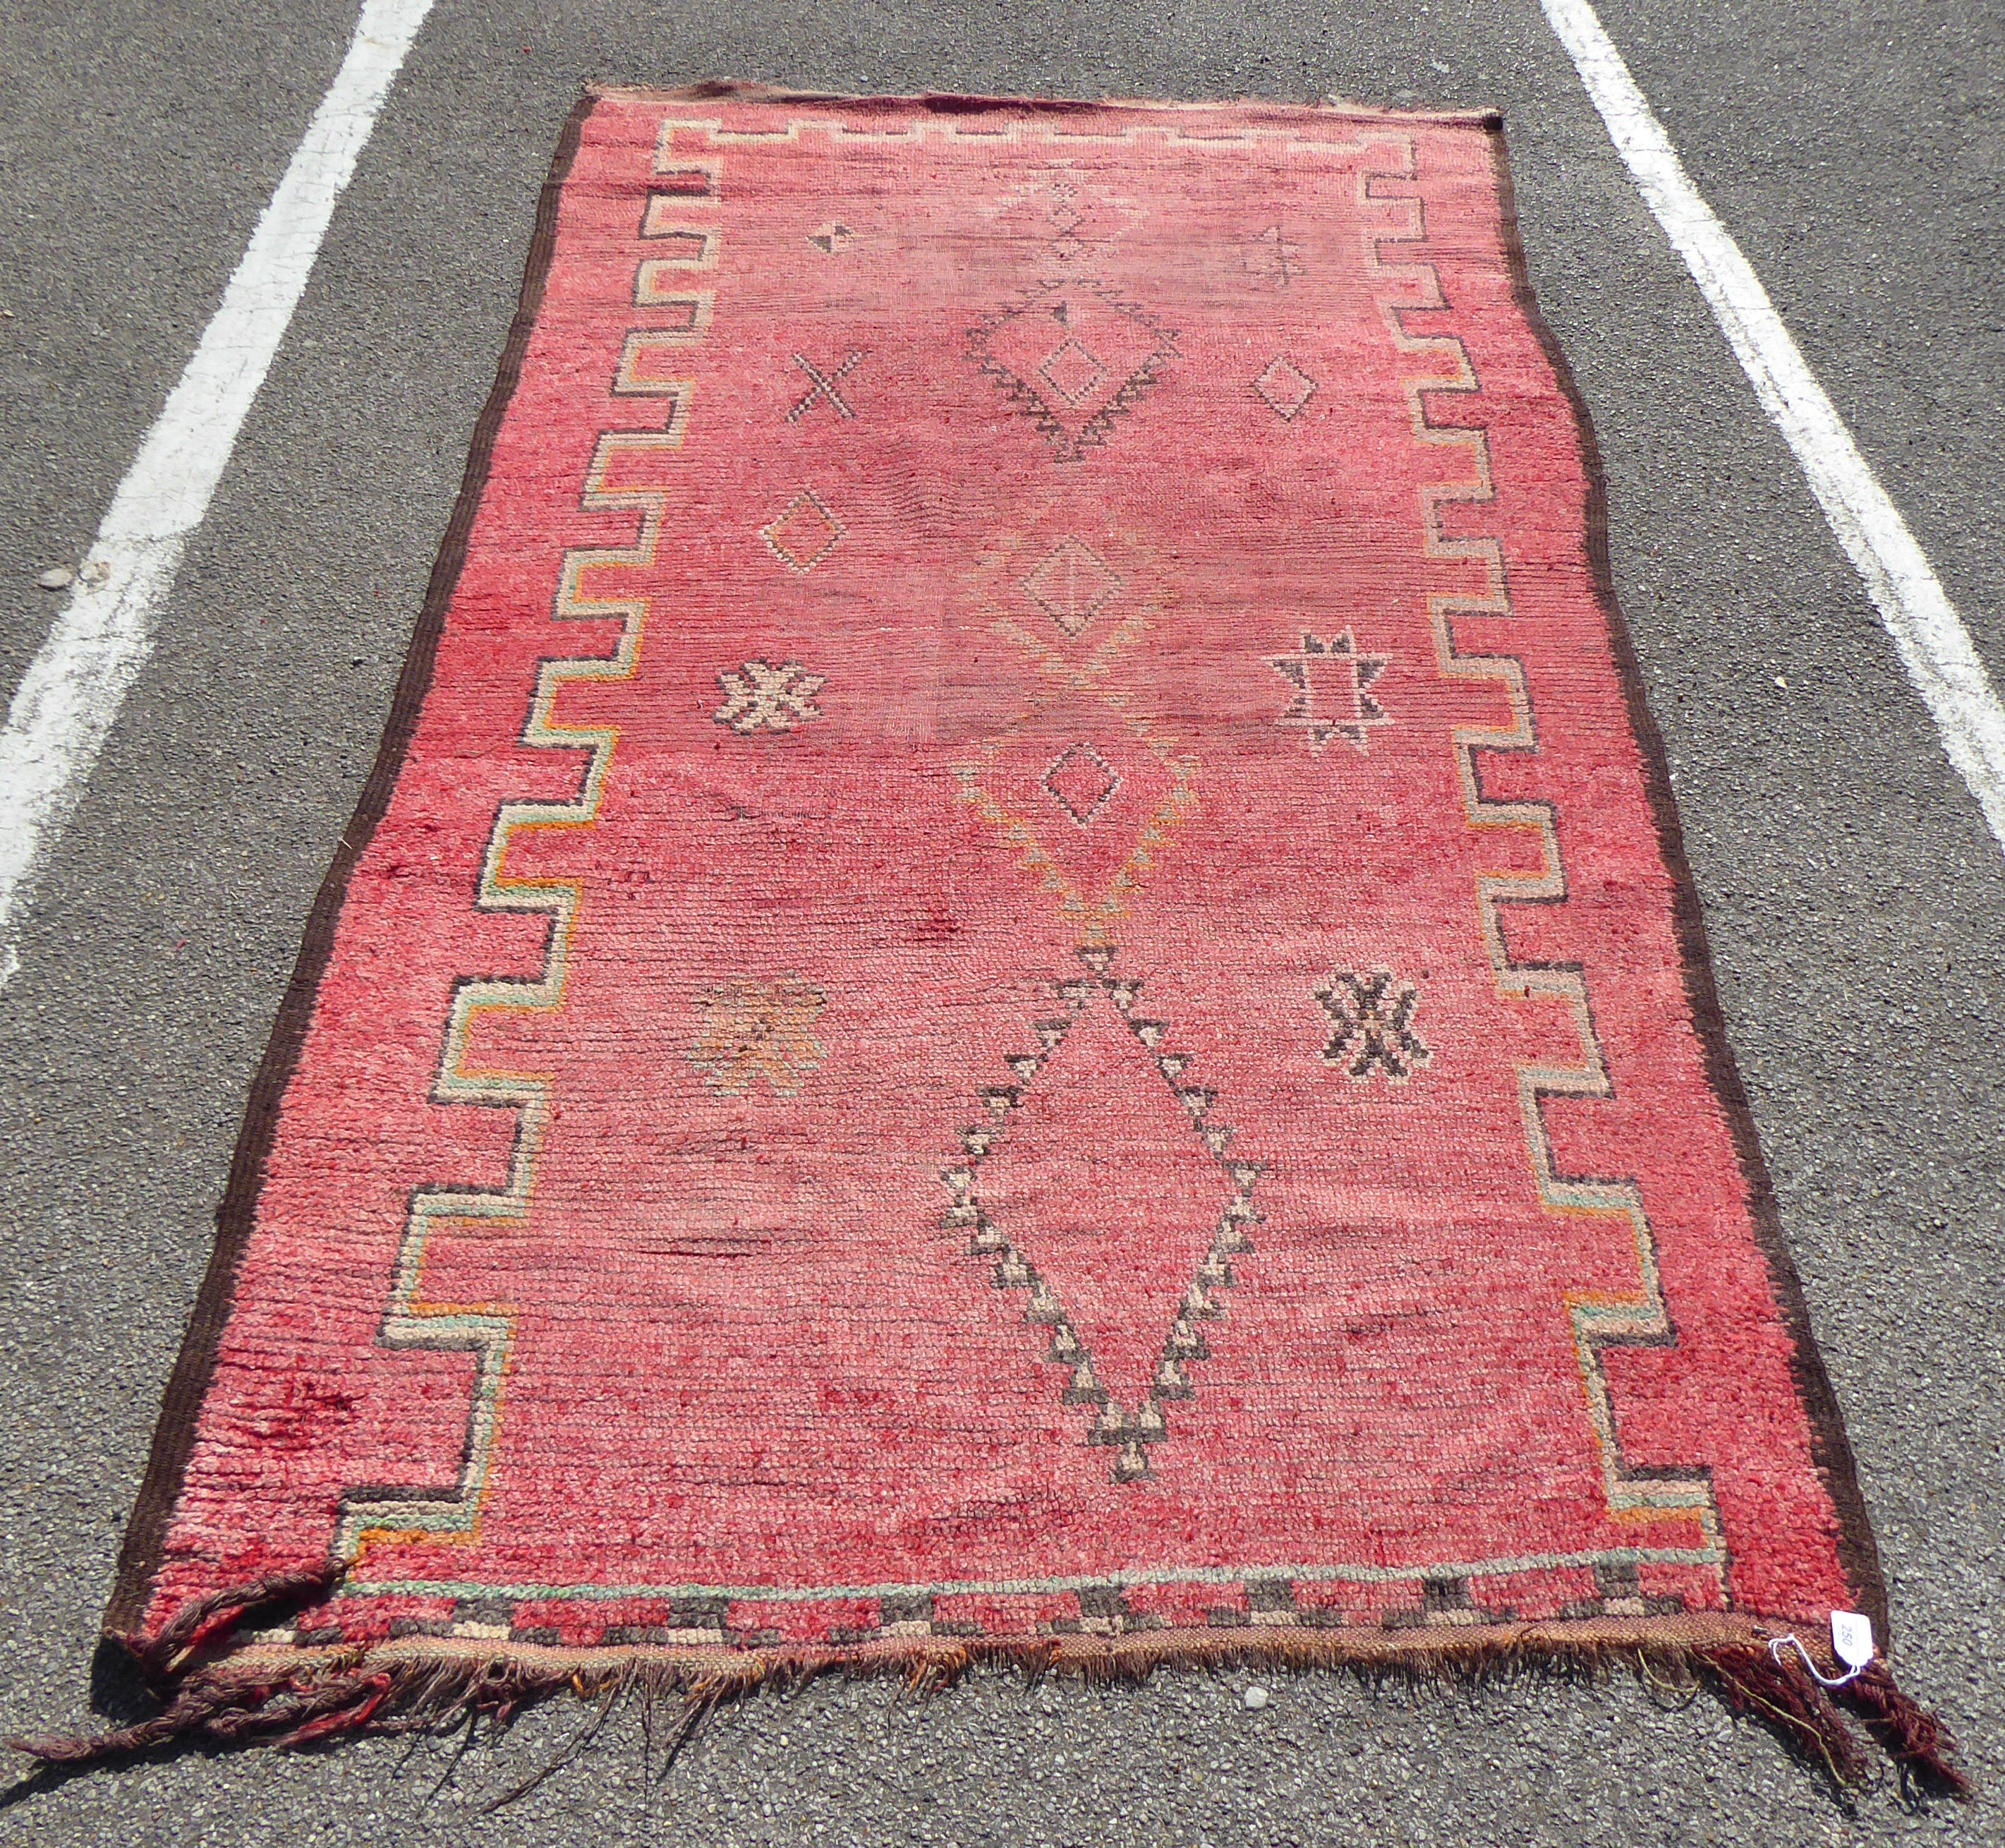 An early 20thC Turkish Kelleh rug with geometric motifs on a red ground  108" x 56"